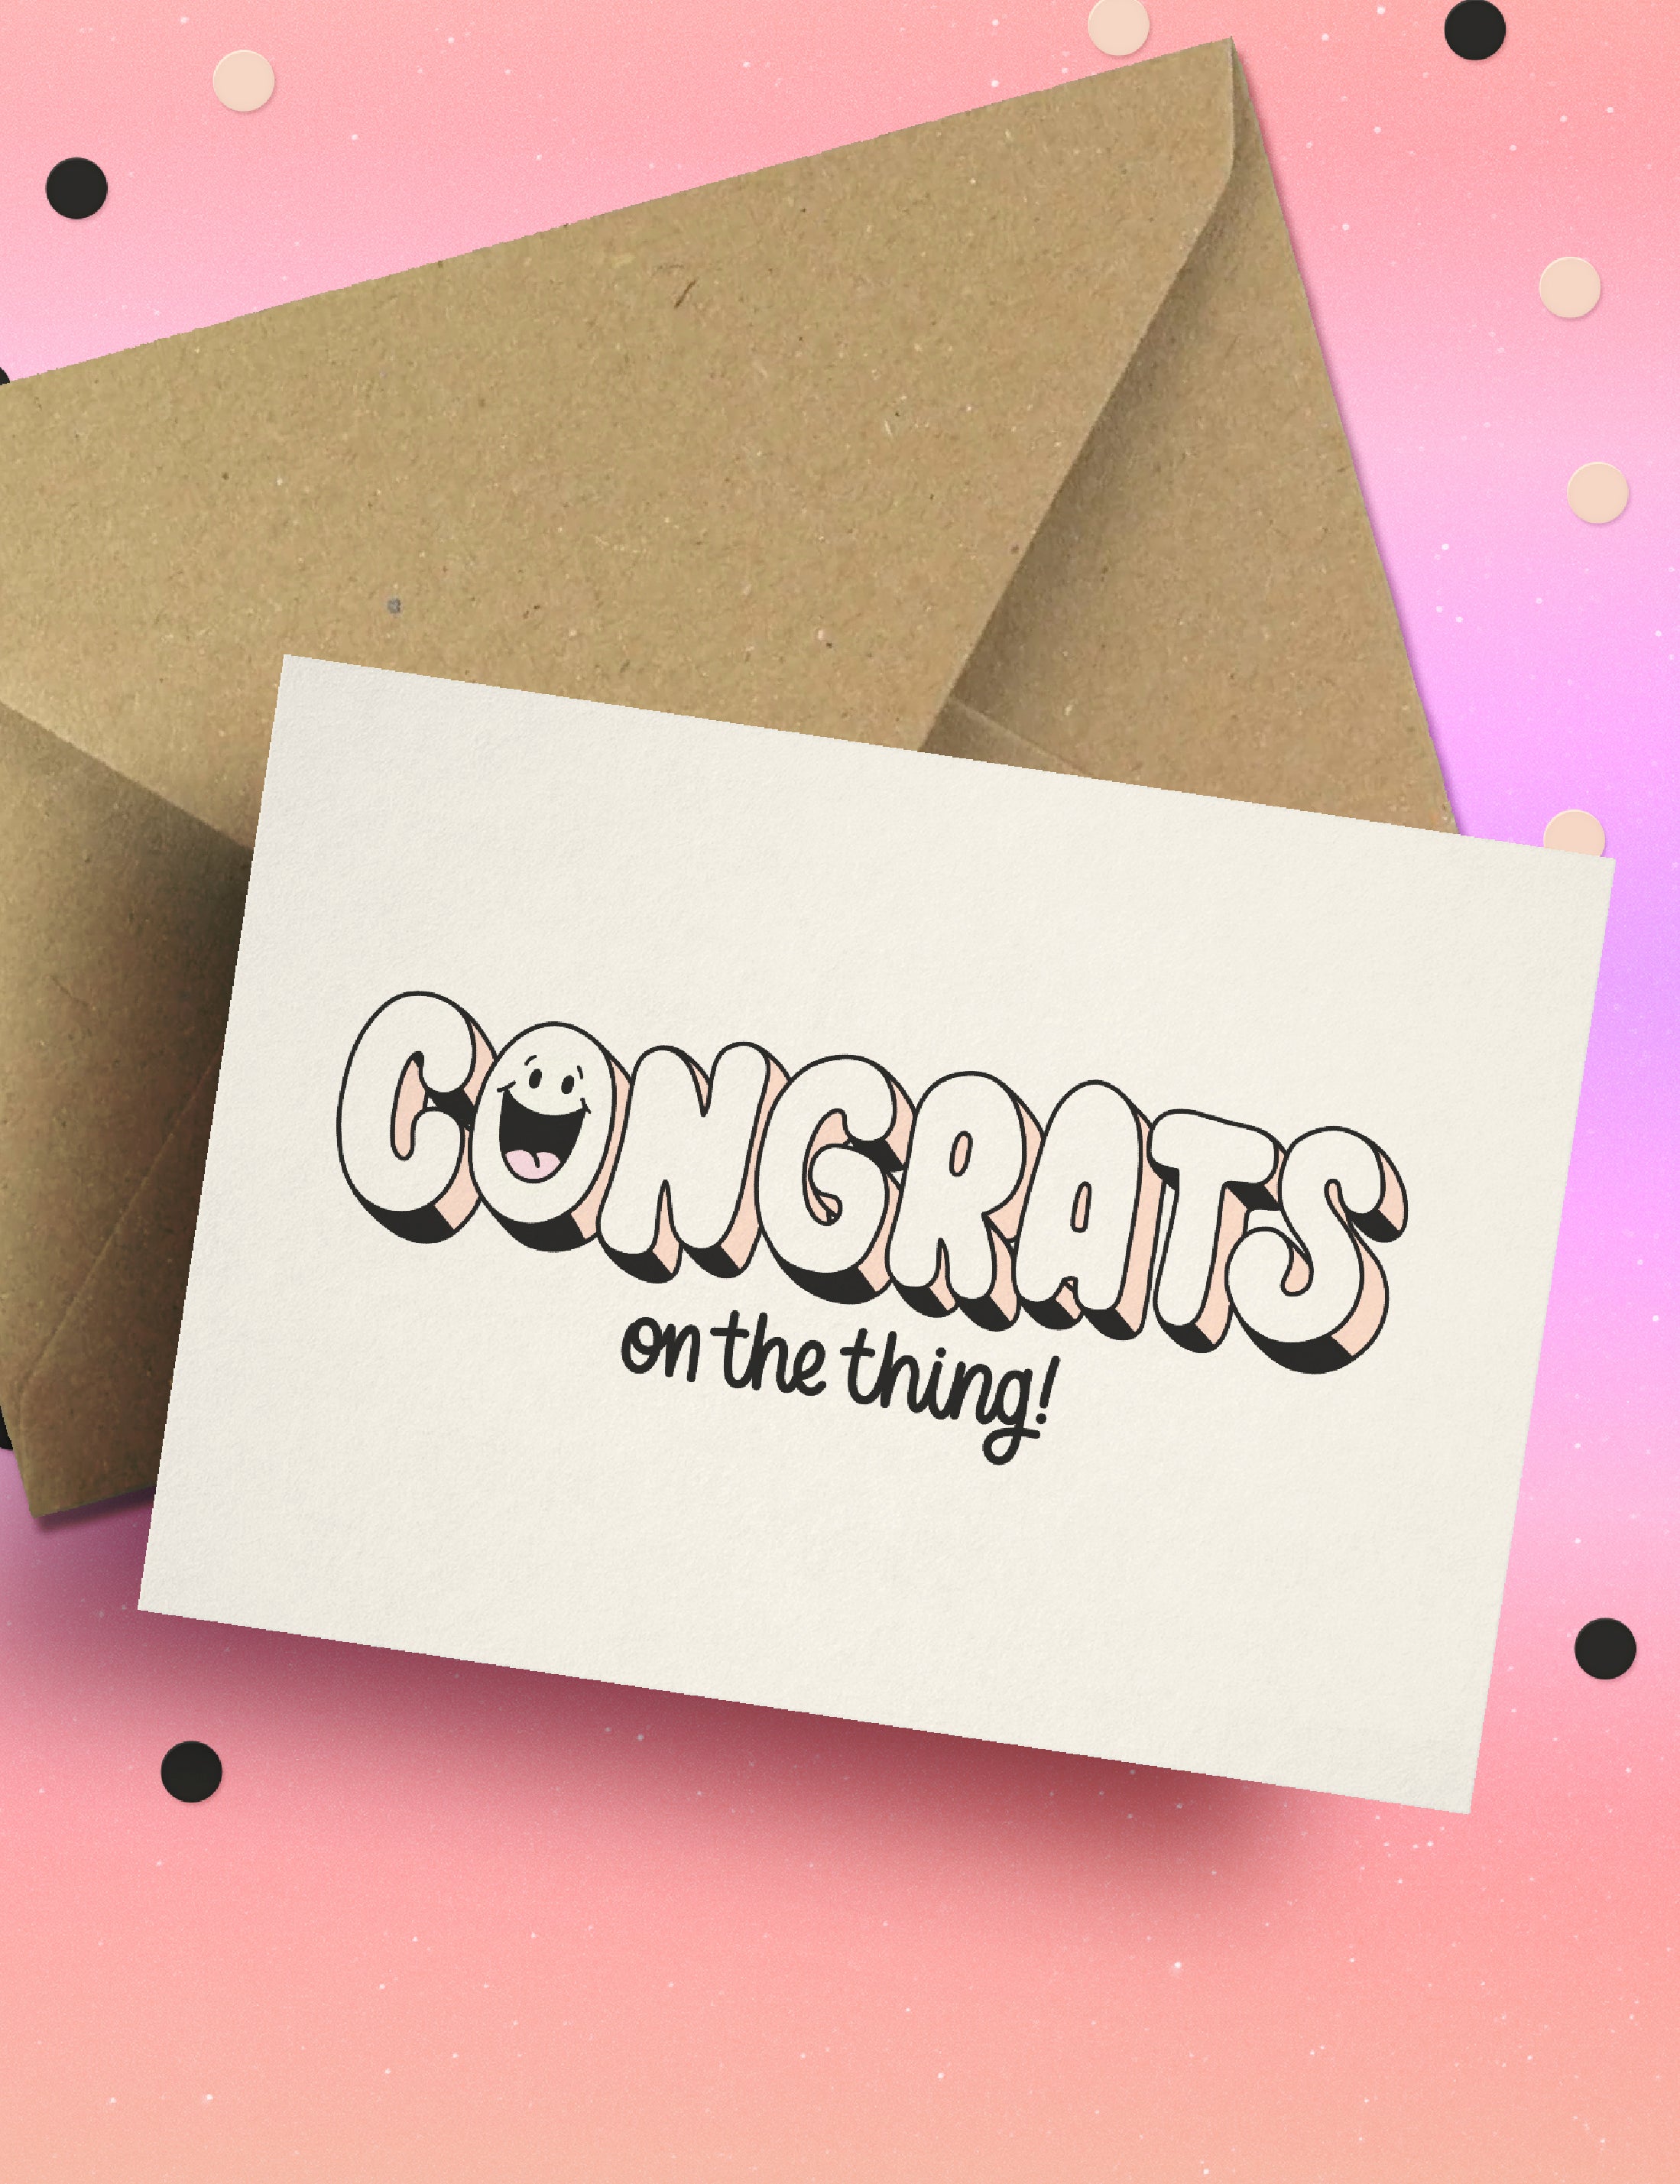 Congrats on the thing! card